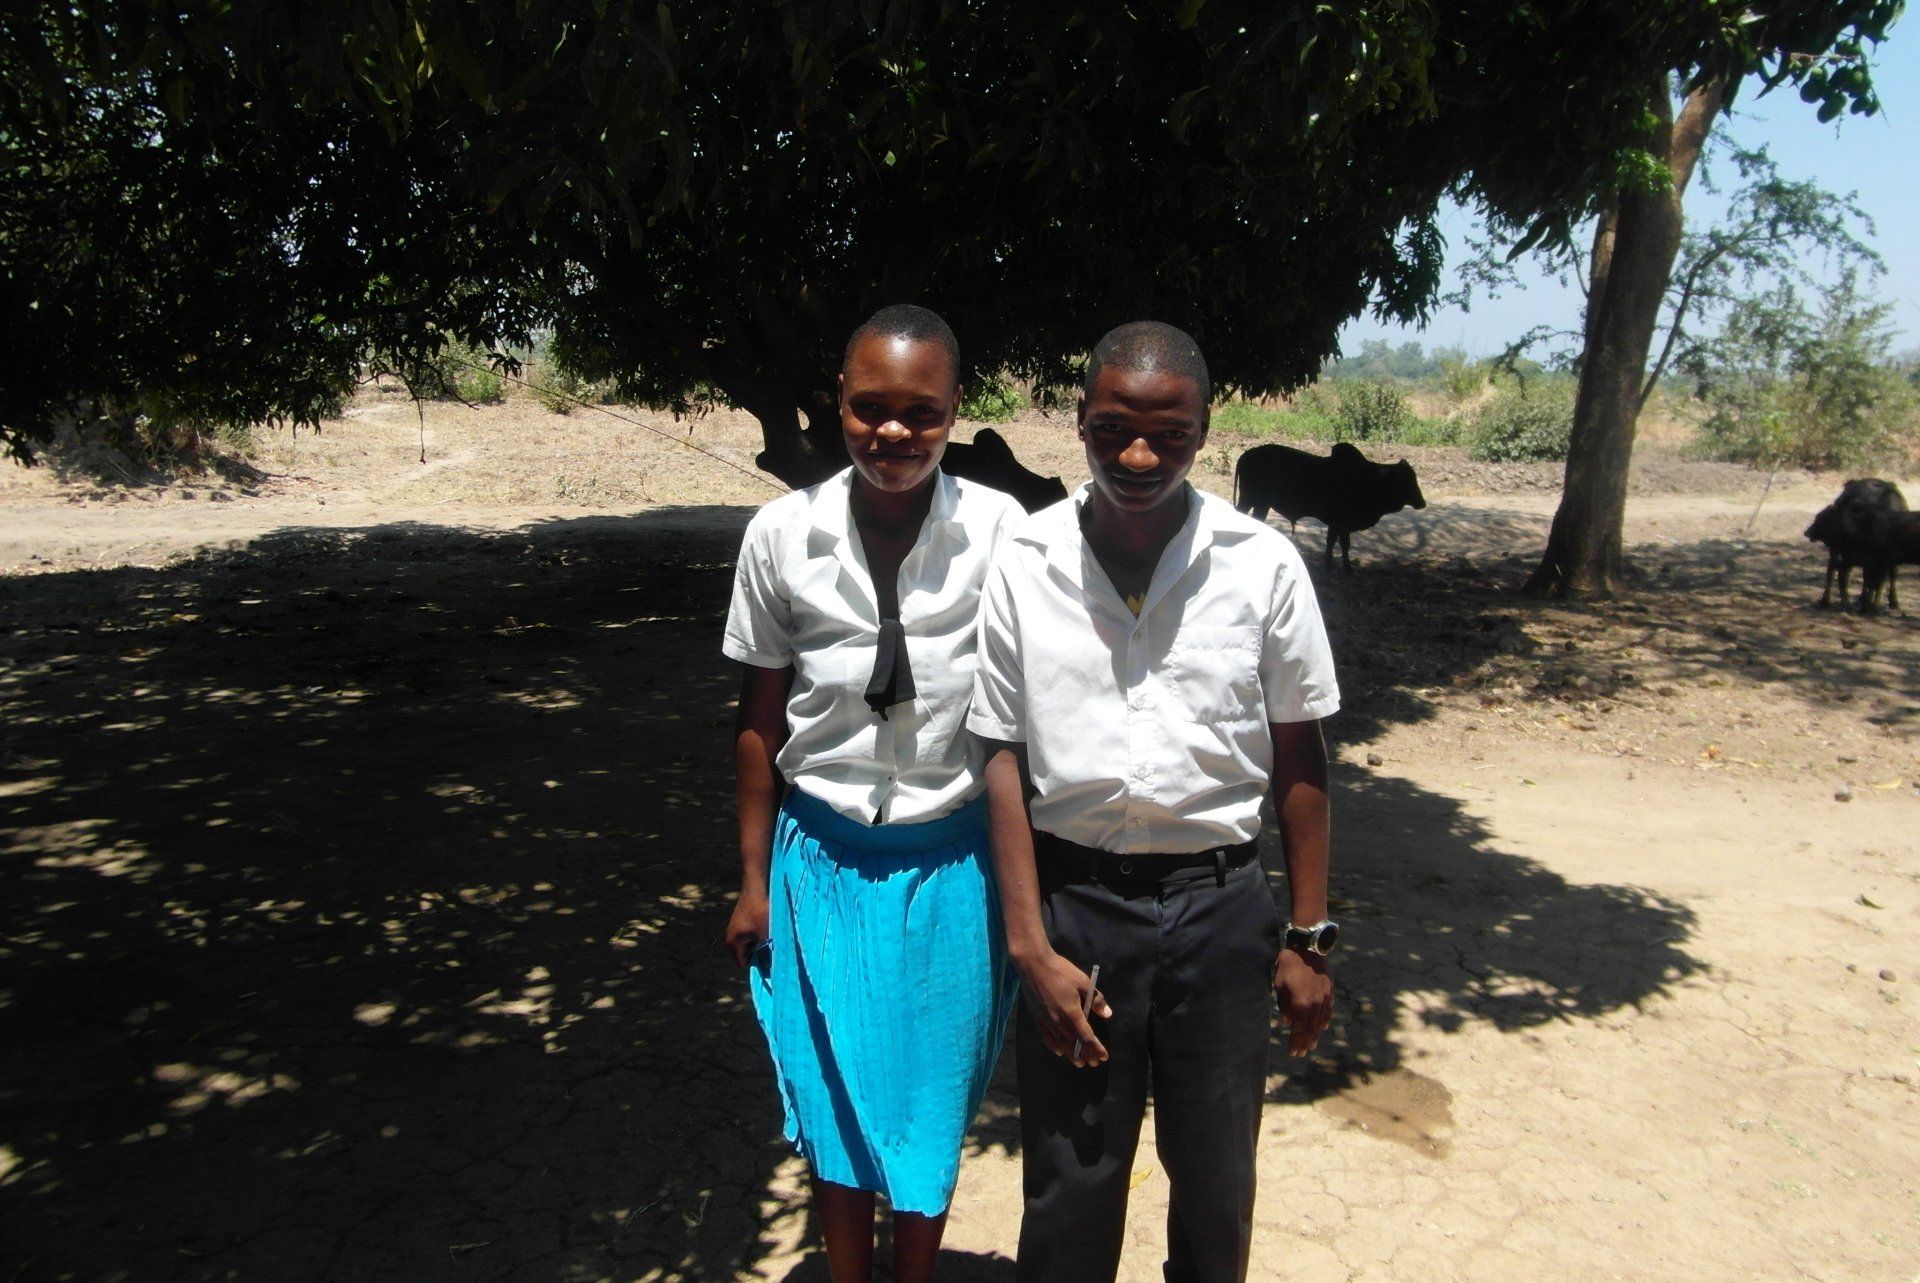 Two teenagers who have manages to attend secondary school in Malawi thanks to the 90kg Rice Challenge